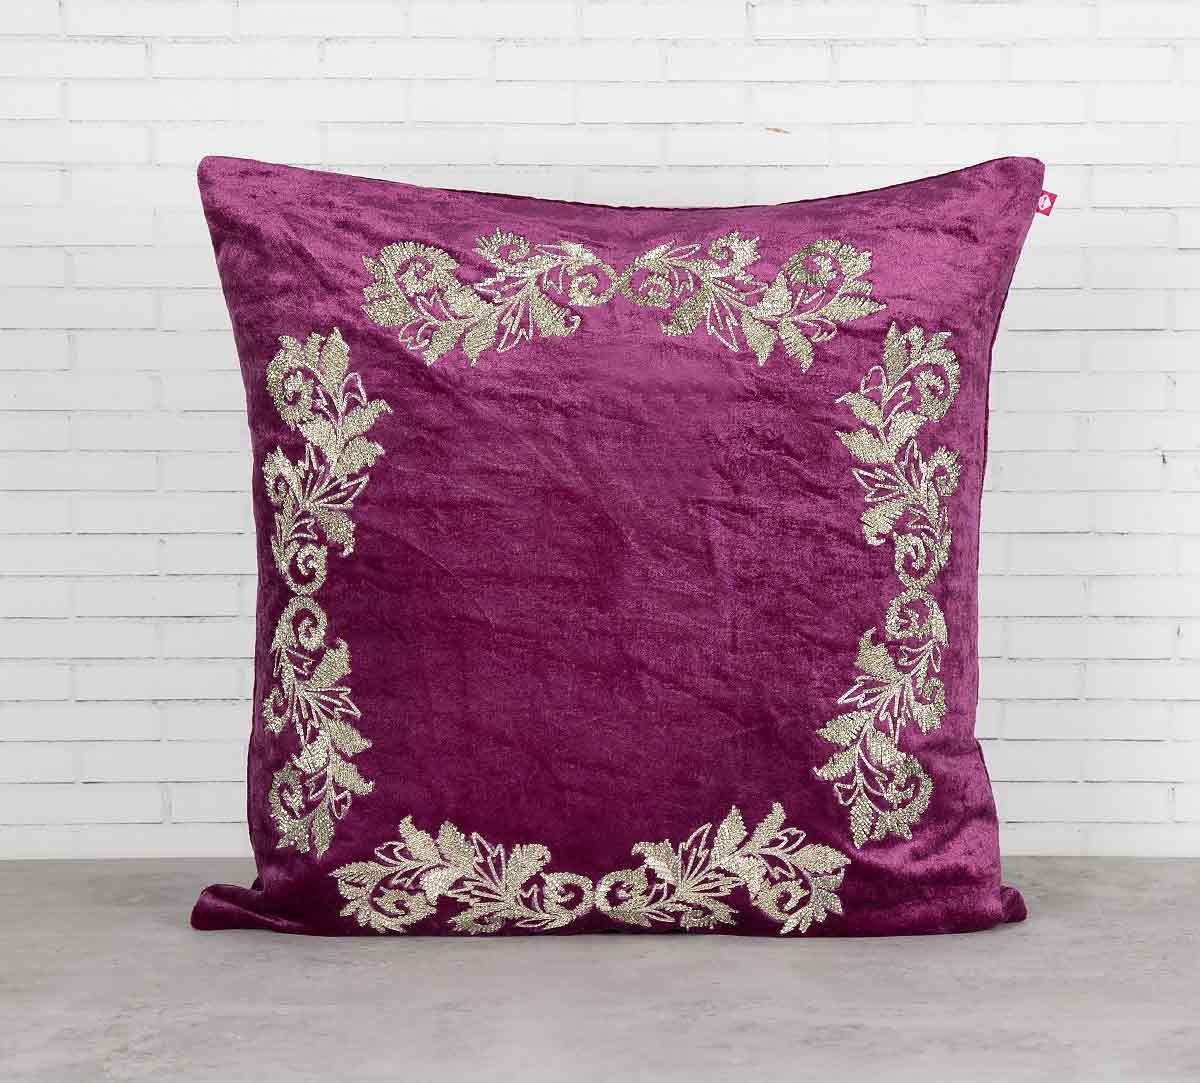 India Circus Floral Enigma Purple Embroidered Velvet Cushion Cover